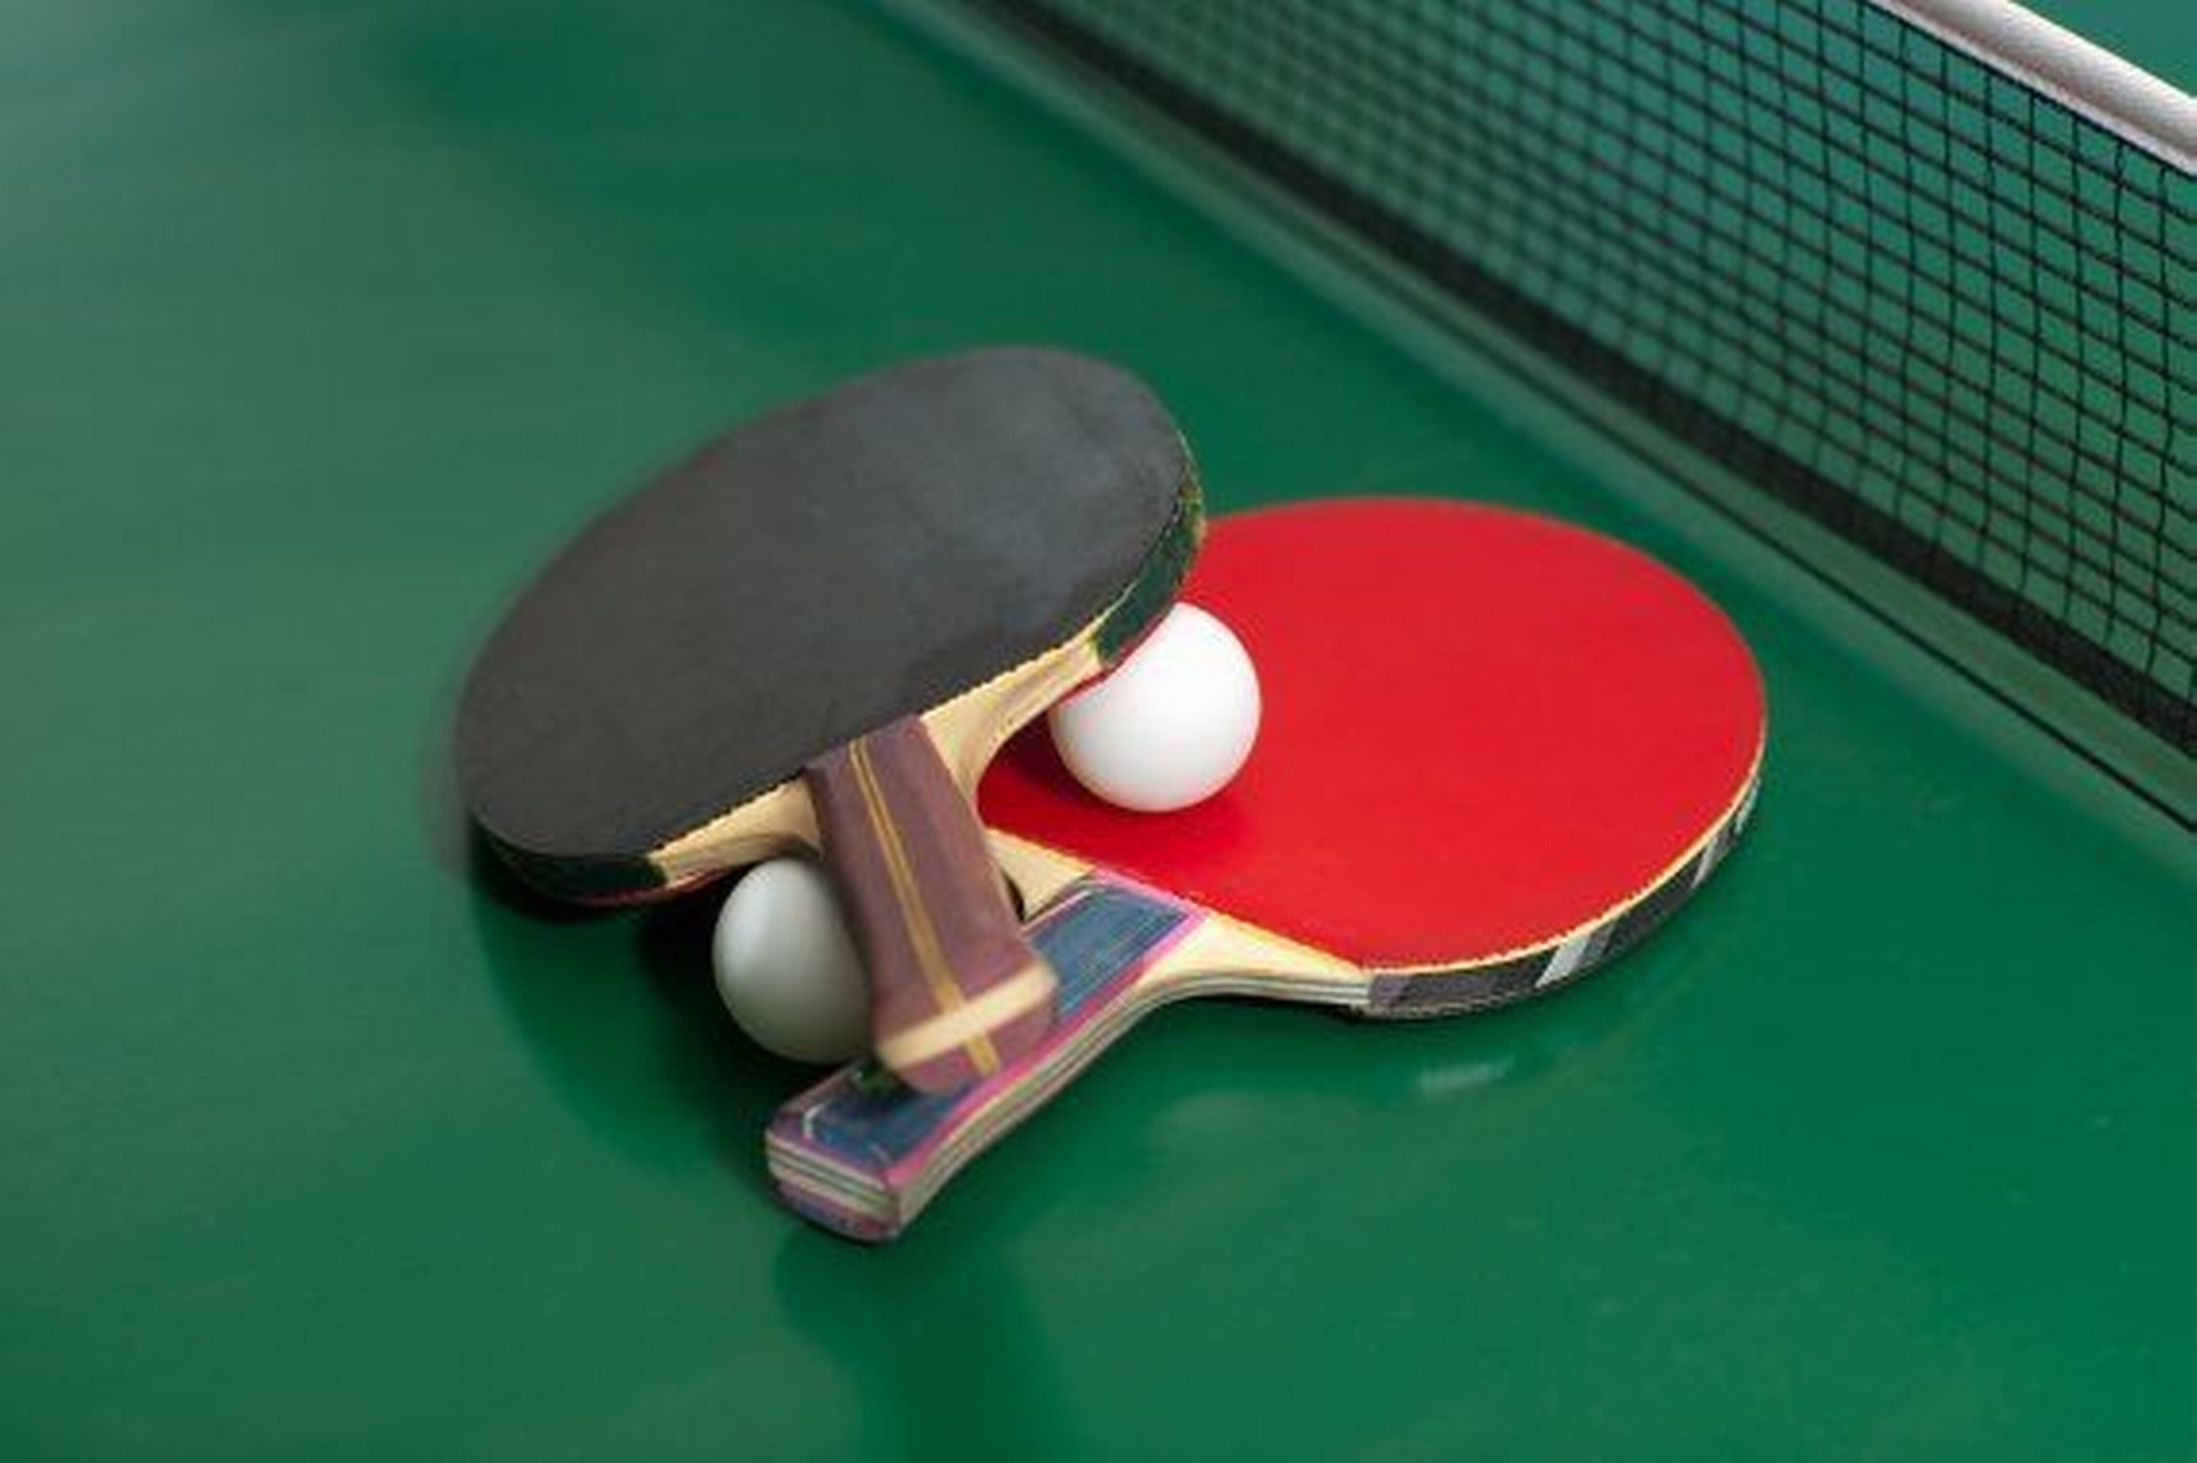 “11 Sports Corporate Table Tennis Championships-2016”